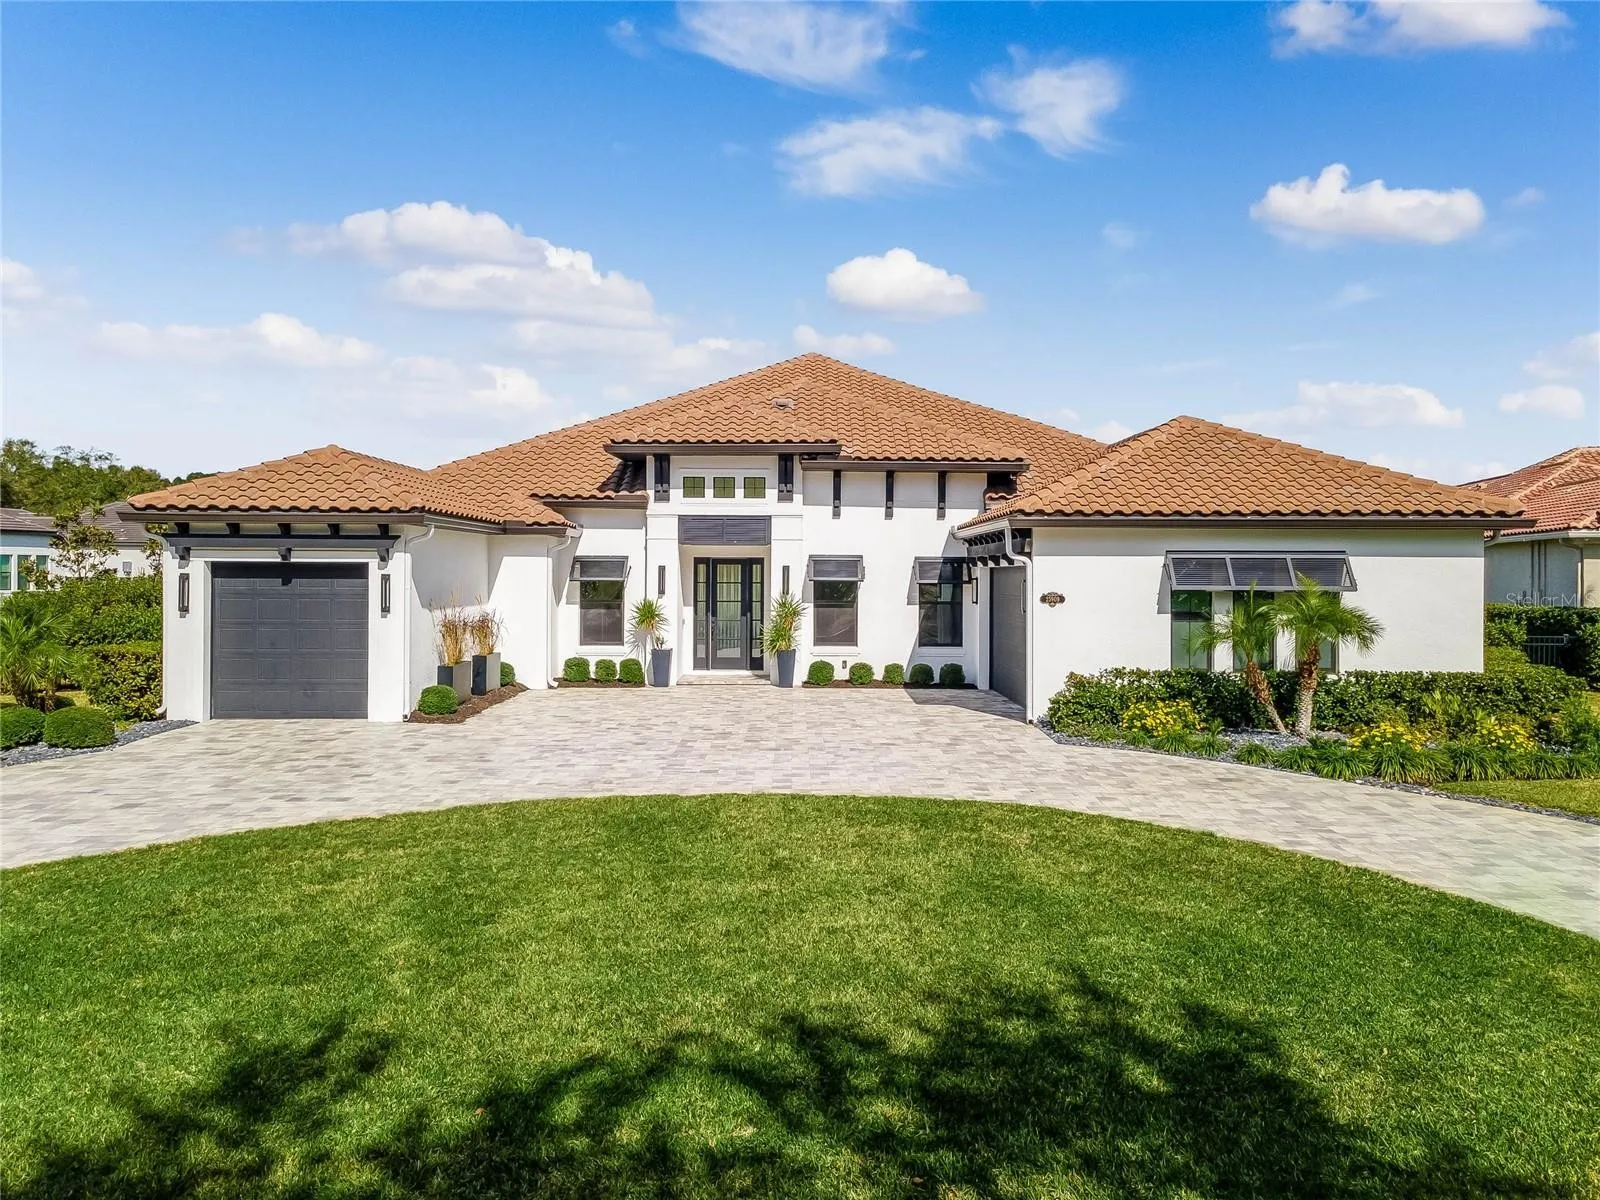 Ken Pozek Group agent Bree Tucker assisted a client with finding their new home at 25909 Roundabout Pt that is located within the RedTail community in Orlando, closing at $1,150,000 on 5/24/2024.